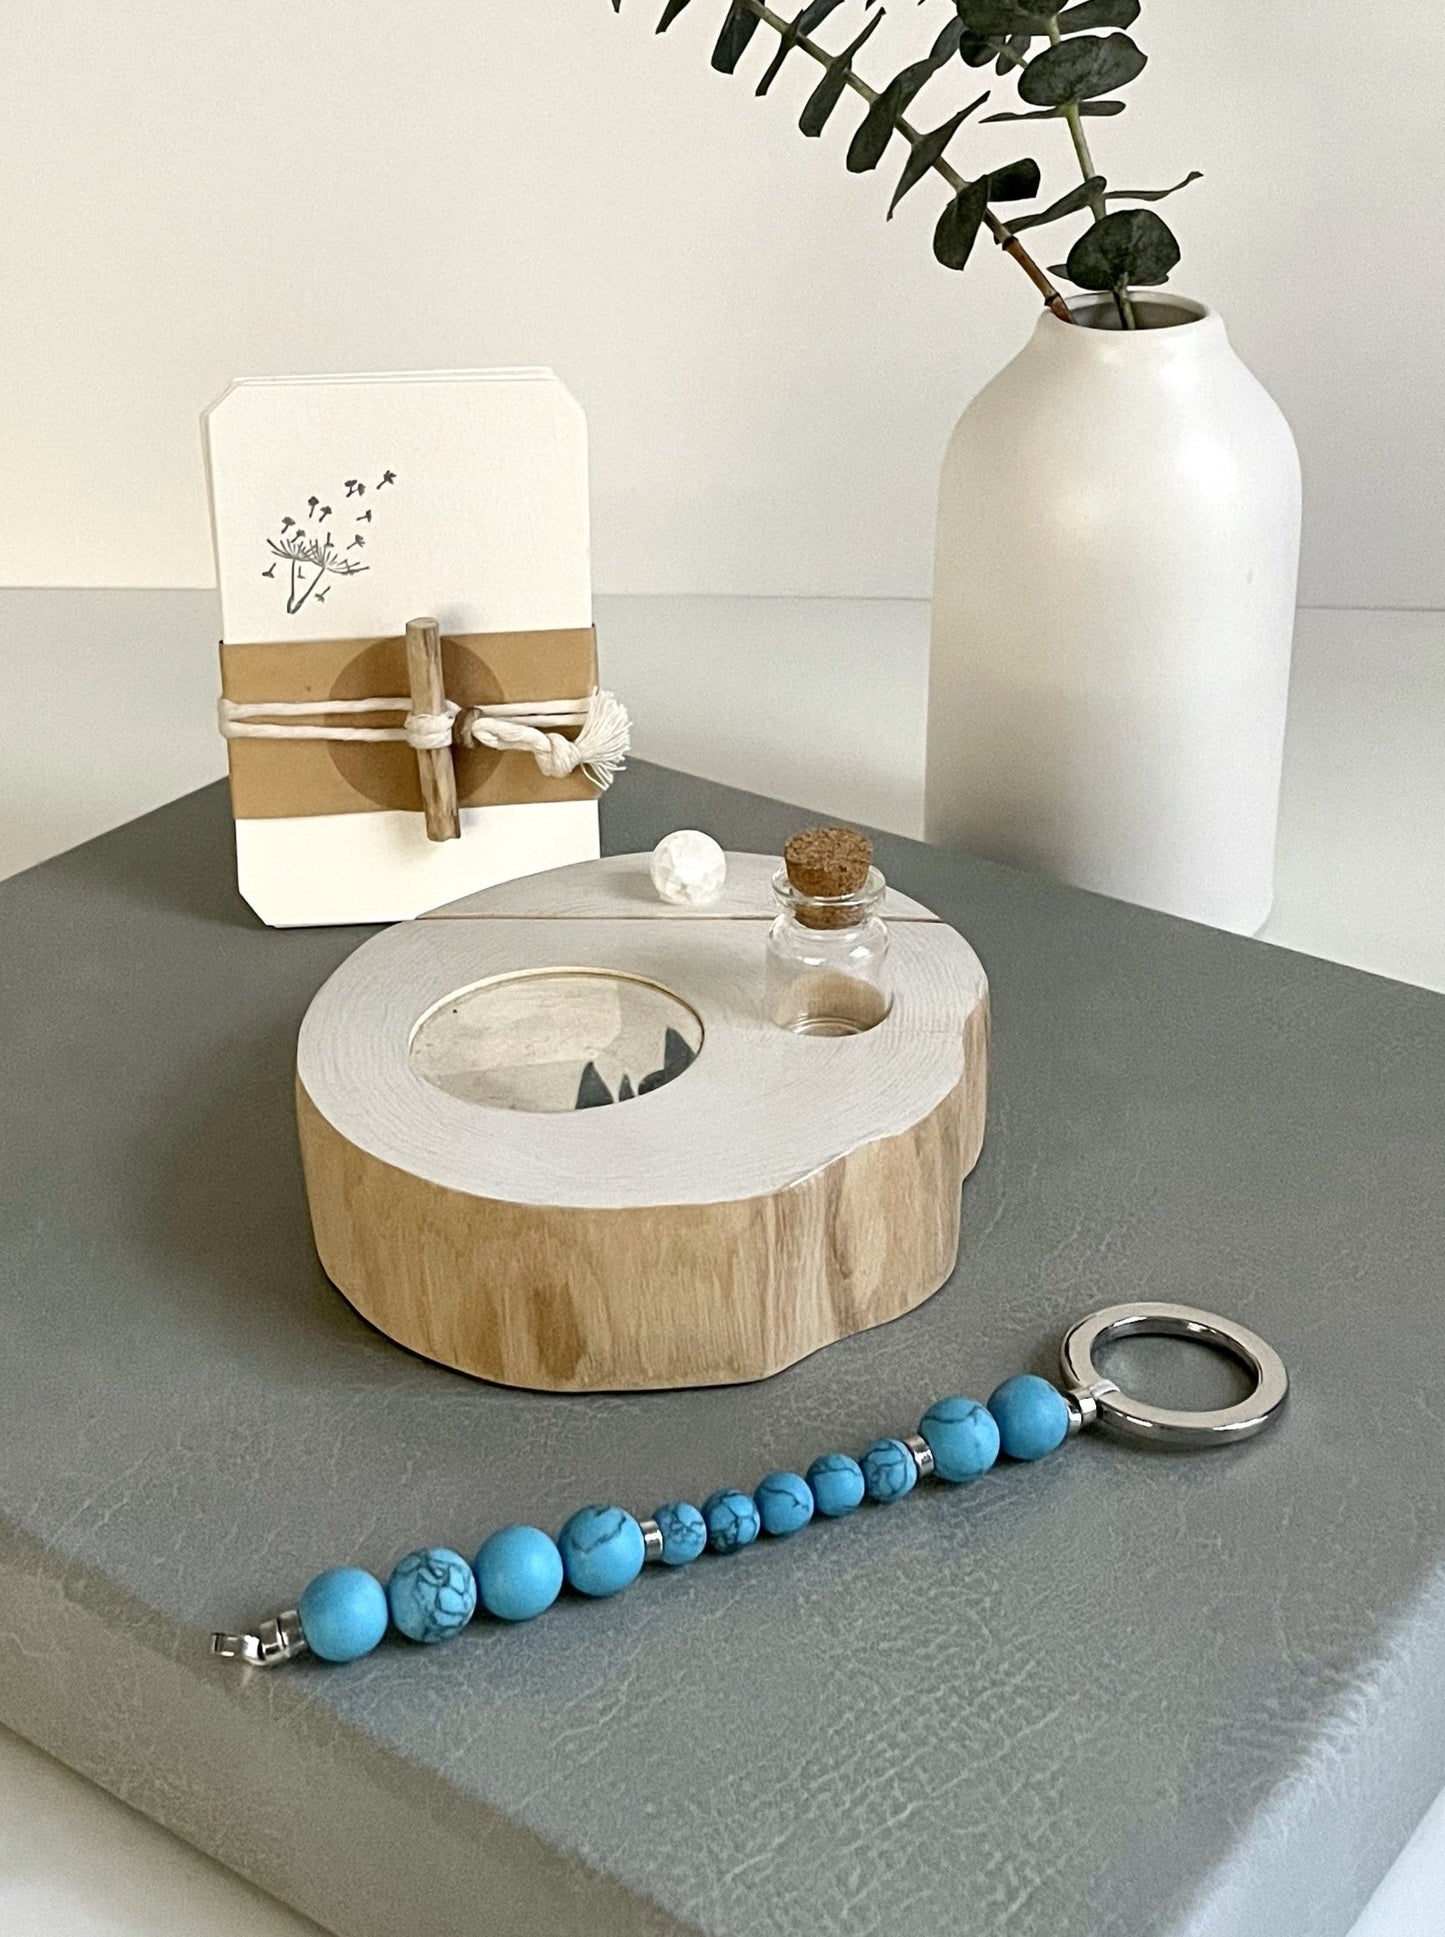 Daily Intention Ritual Set - Turquoise